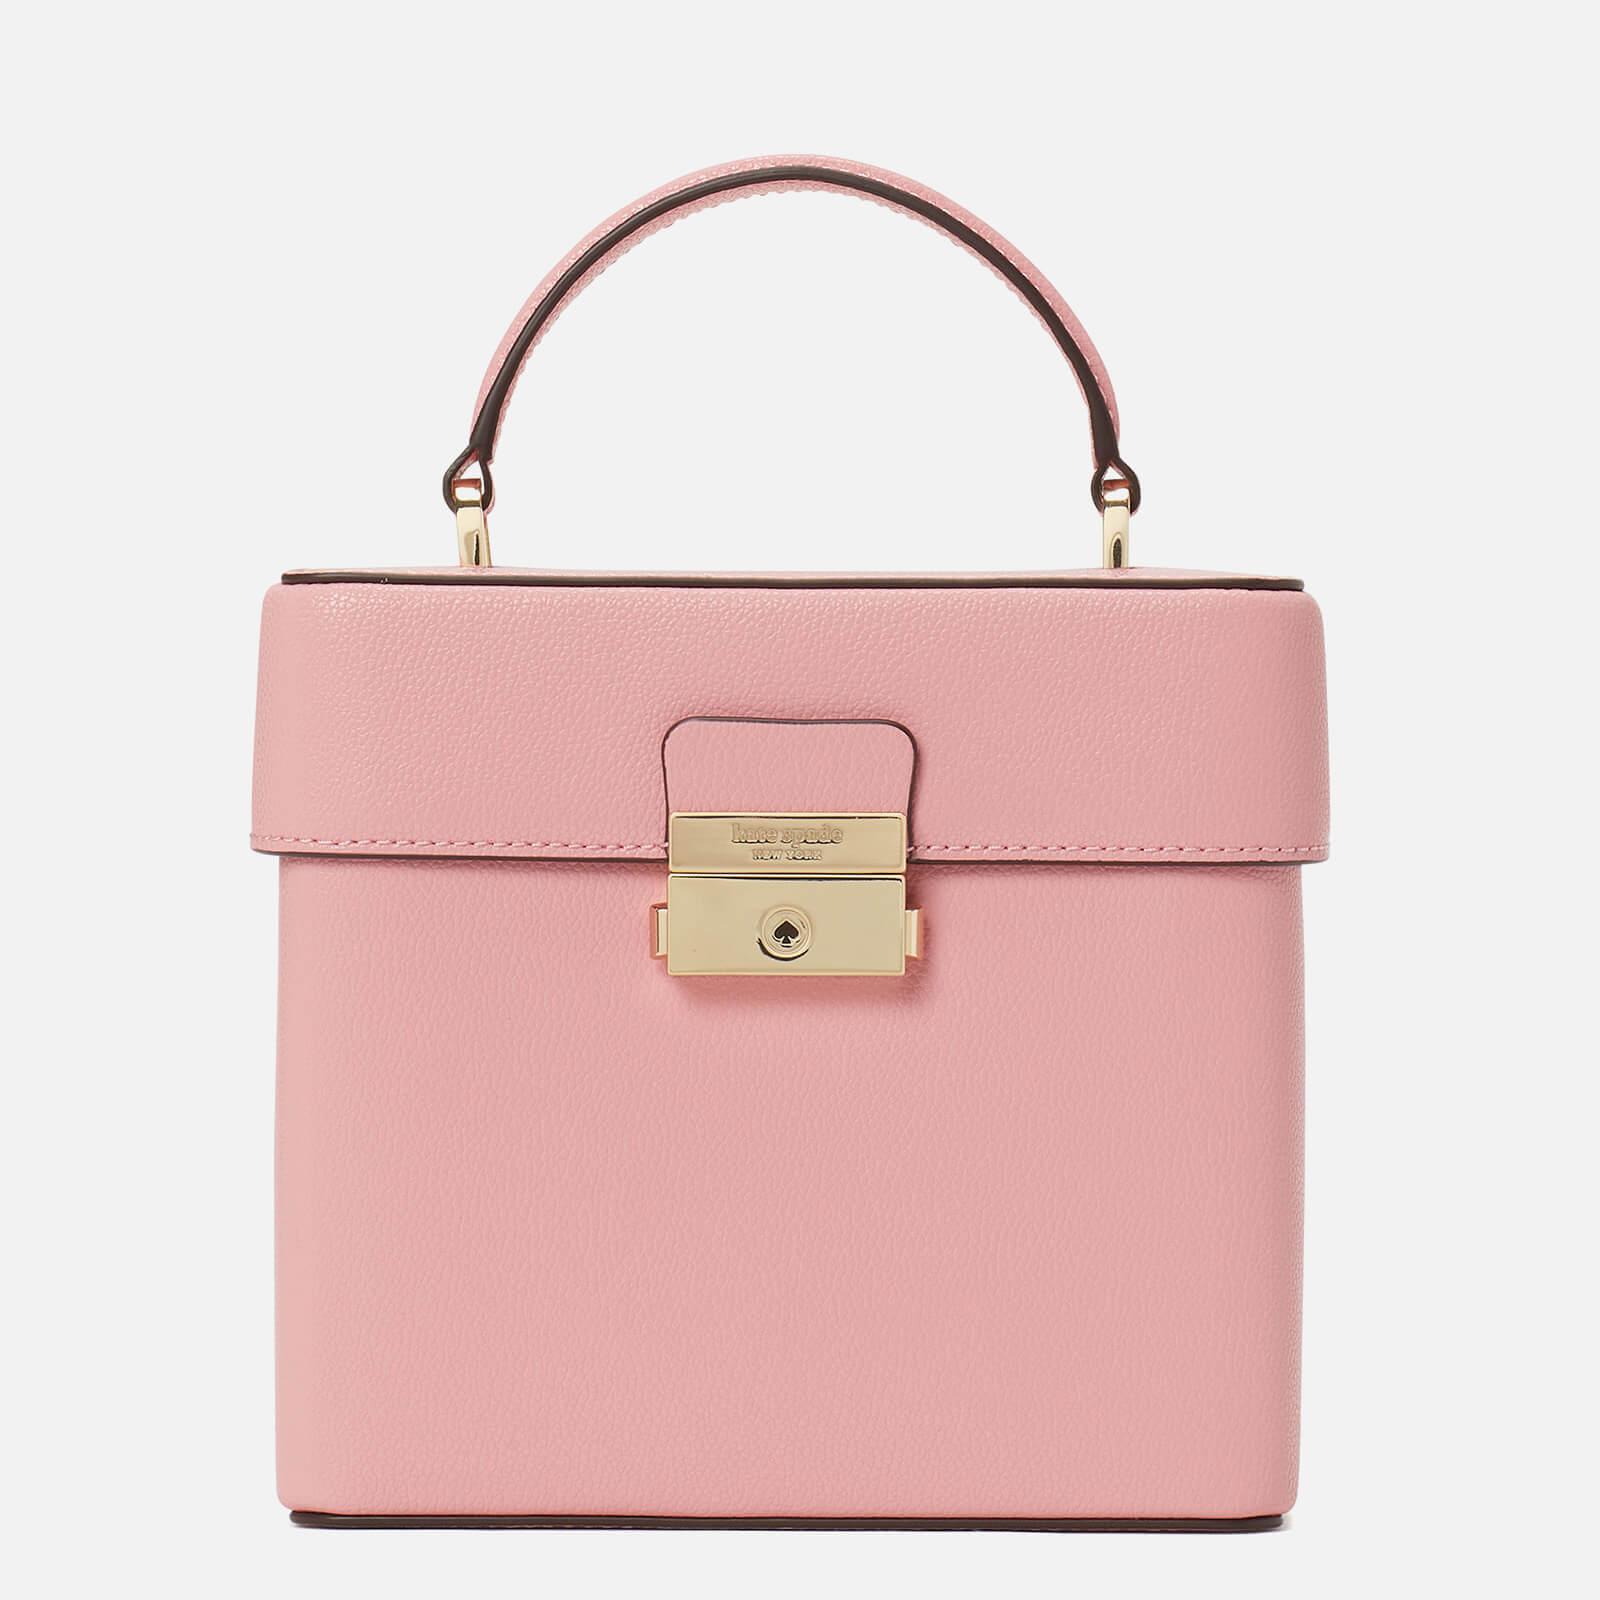 Kate Spade Voyage Small Top Handle Bag in Pink | Lyst